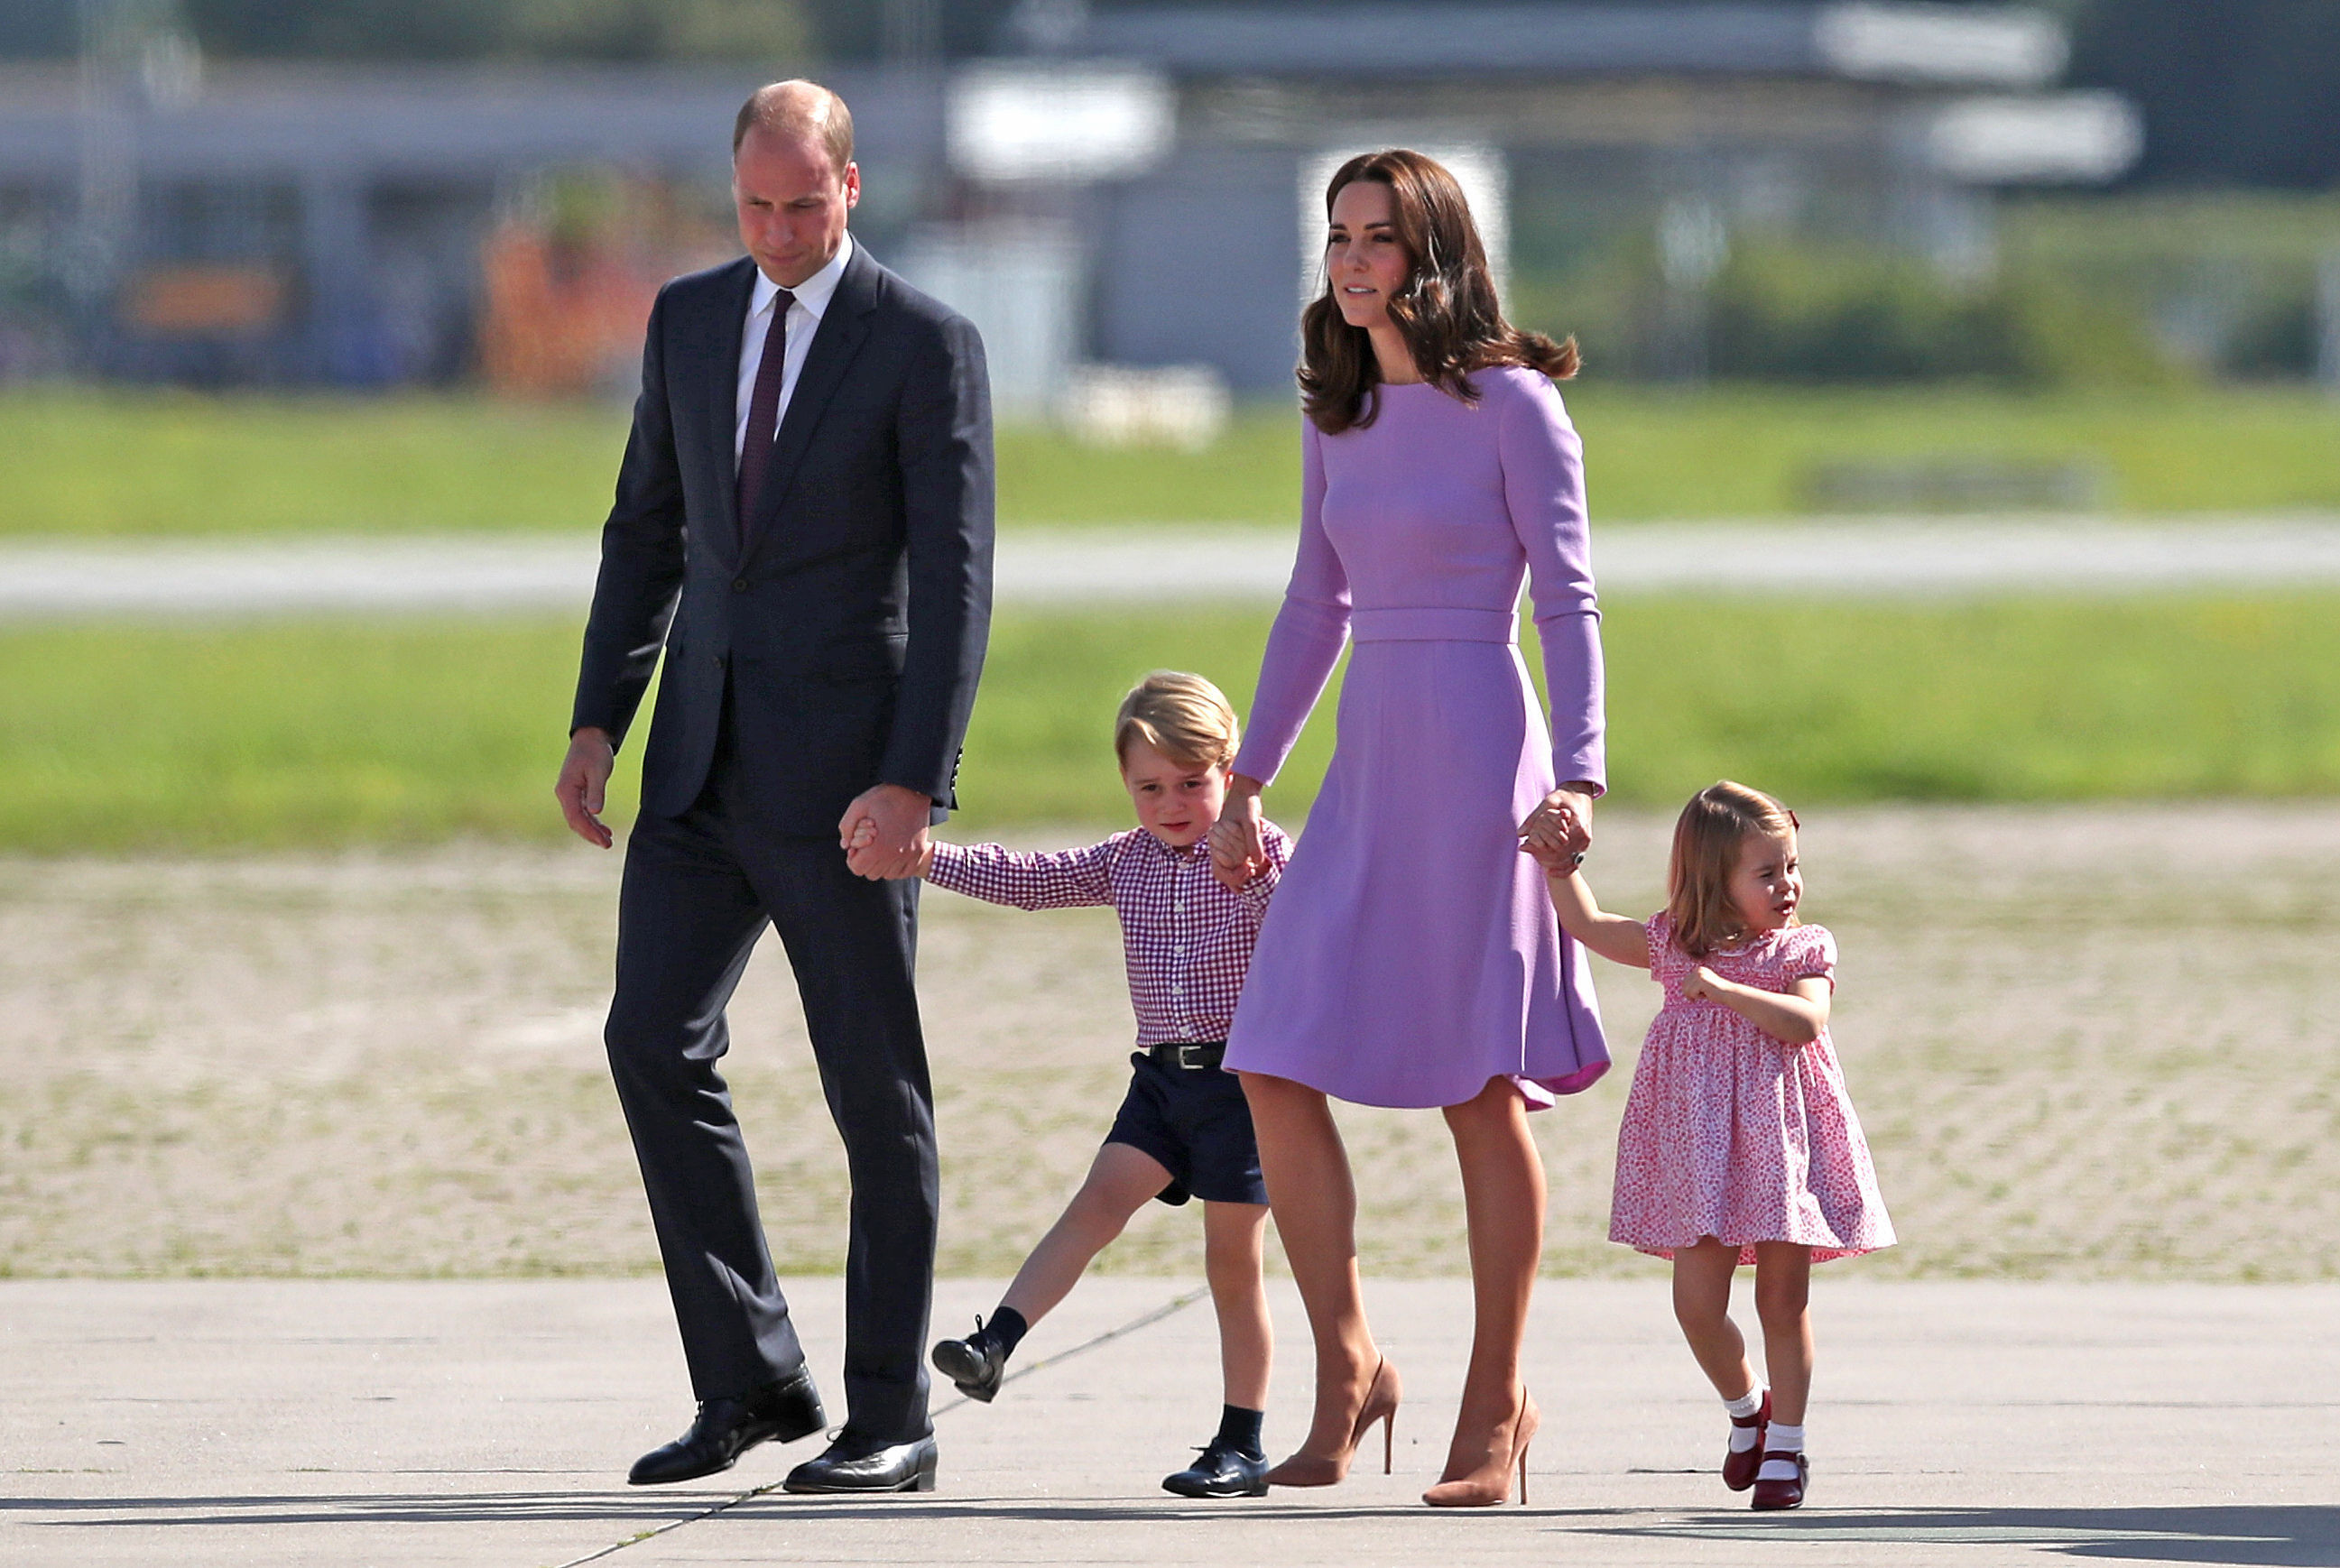 The Duke and Duchess of Cambridge and their children, Prince George and Princess Charlotte, visit Airbus in Hamburg, Germany